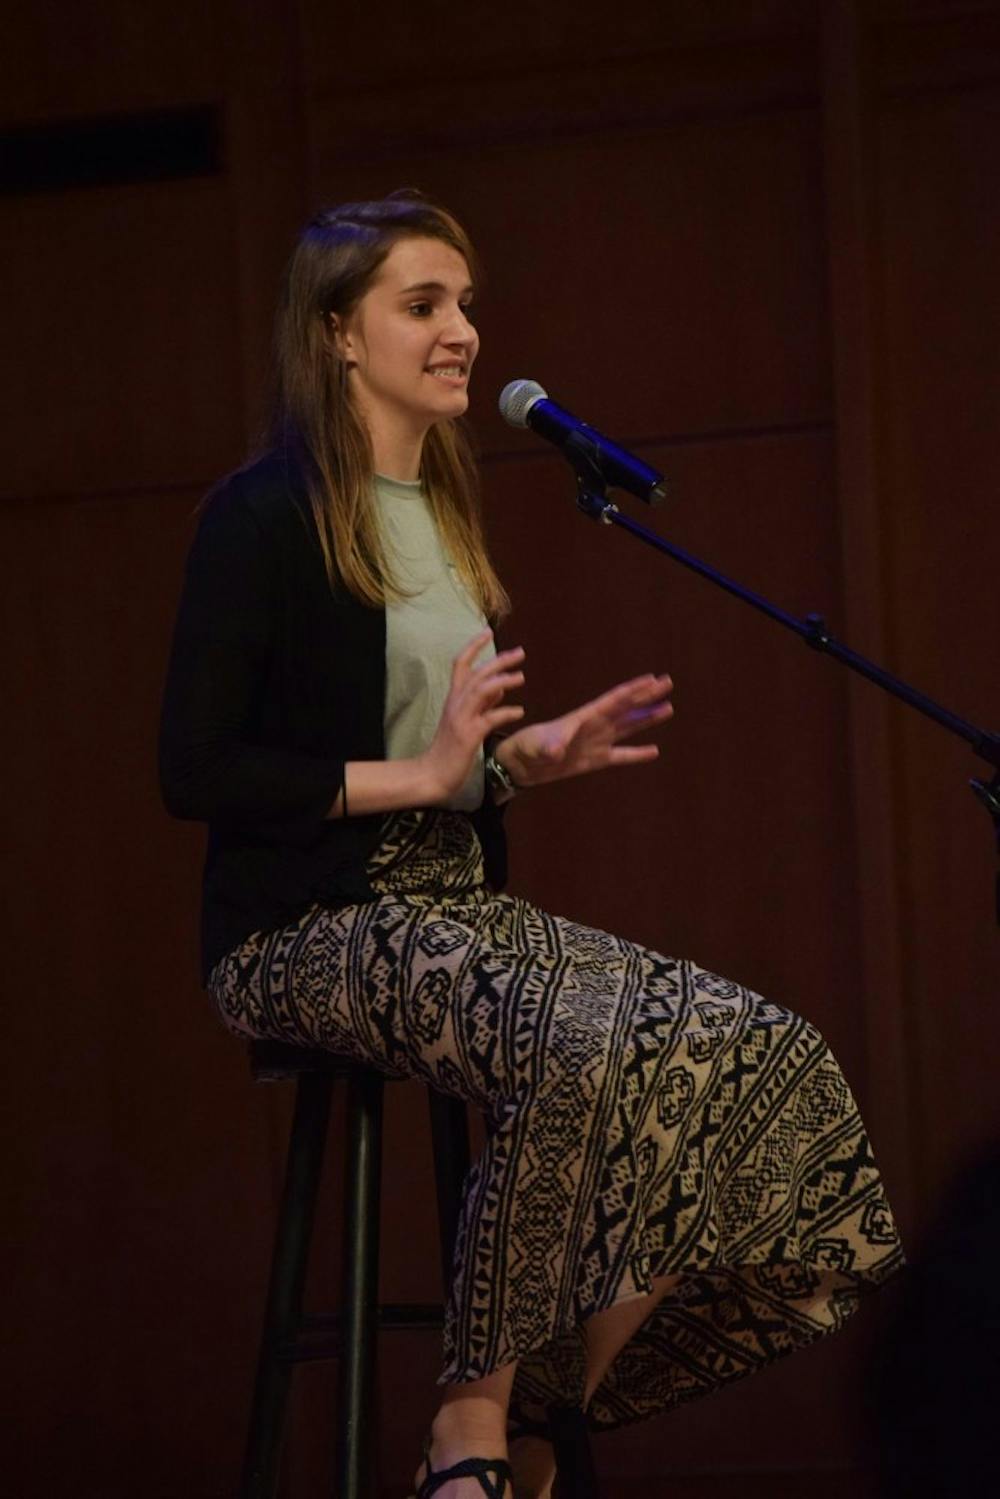 <p>From anxious outsider to confident community member, Duke rising&nbsp;senior&nbsp;Jenna Peters&nbsp;shared a story of transformation and acceptance &mdash; and a little dancing.</p>